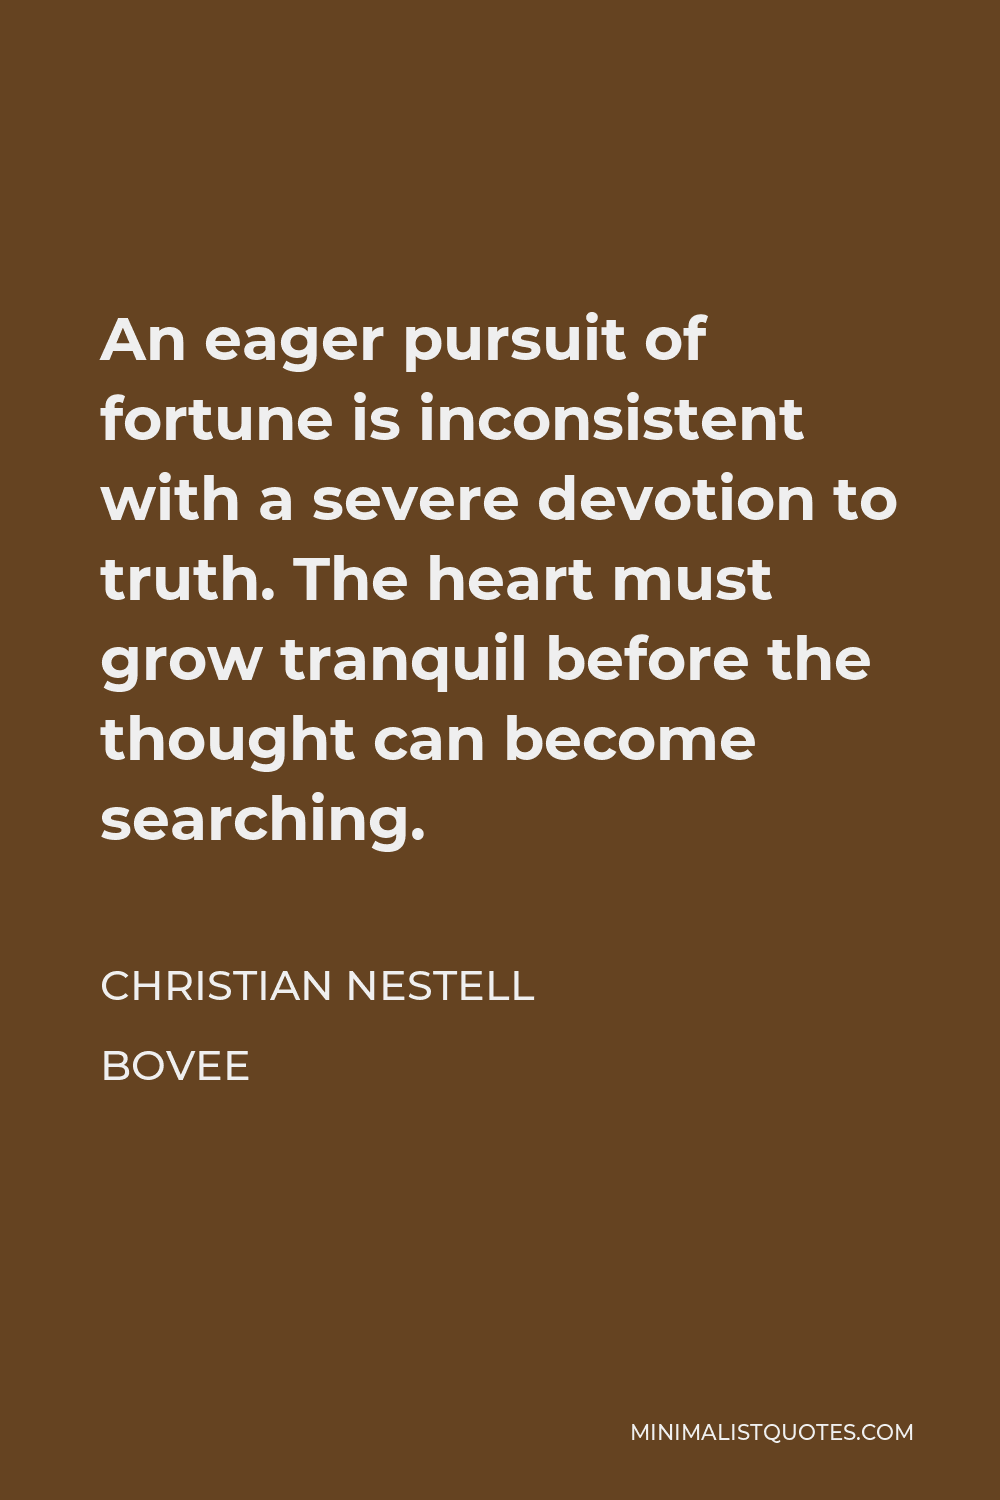 Christian Nestell Bovee Quote - An eager pursuit of fortune is inconsistent with a severe devotion to truth. The heart must grow tranquil before the thought can become searching.